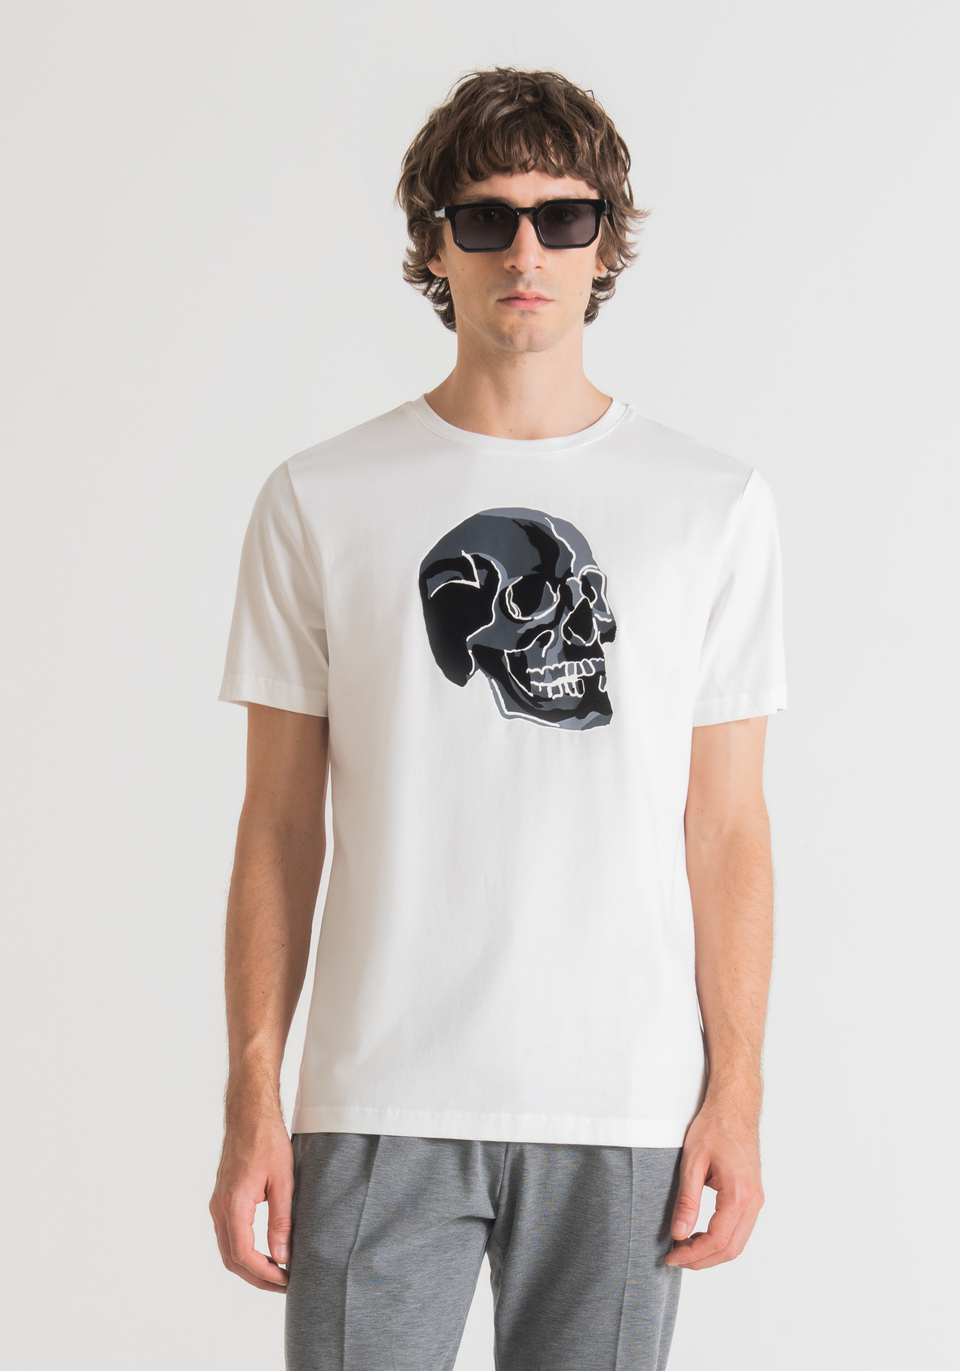 REGULAR-FIT T-SHIRT IN PURE COTTON WITH FLOCK PRINT SKULL - Antony Morato Online Shop